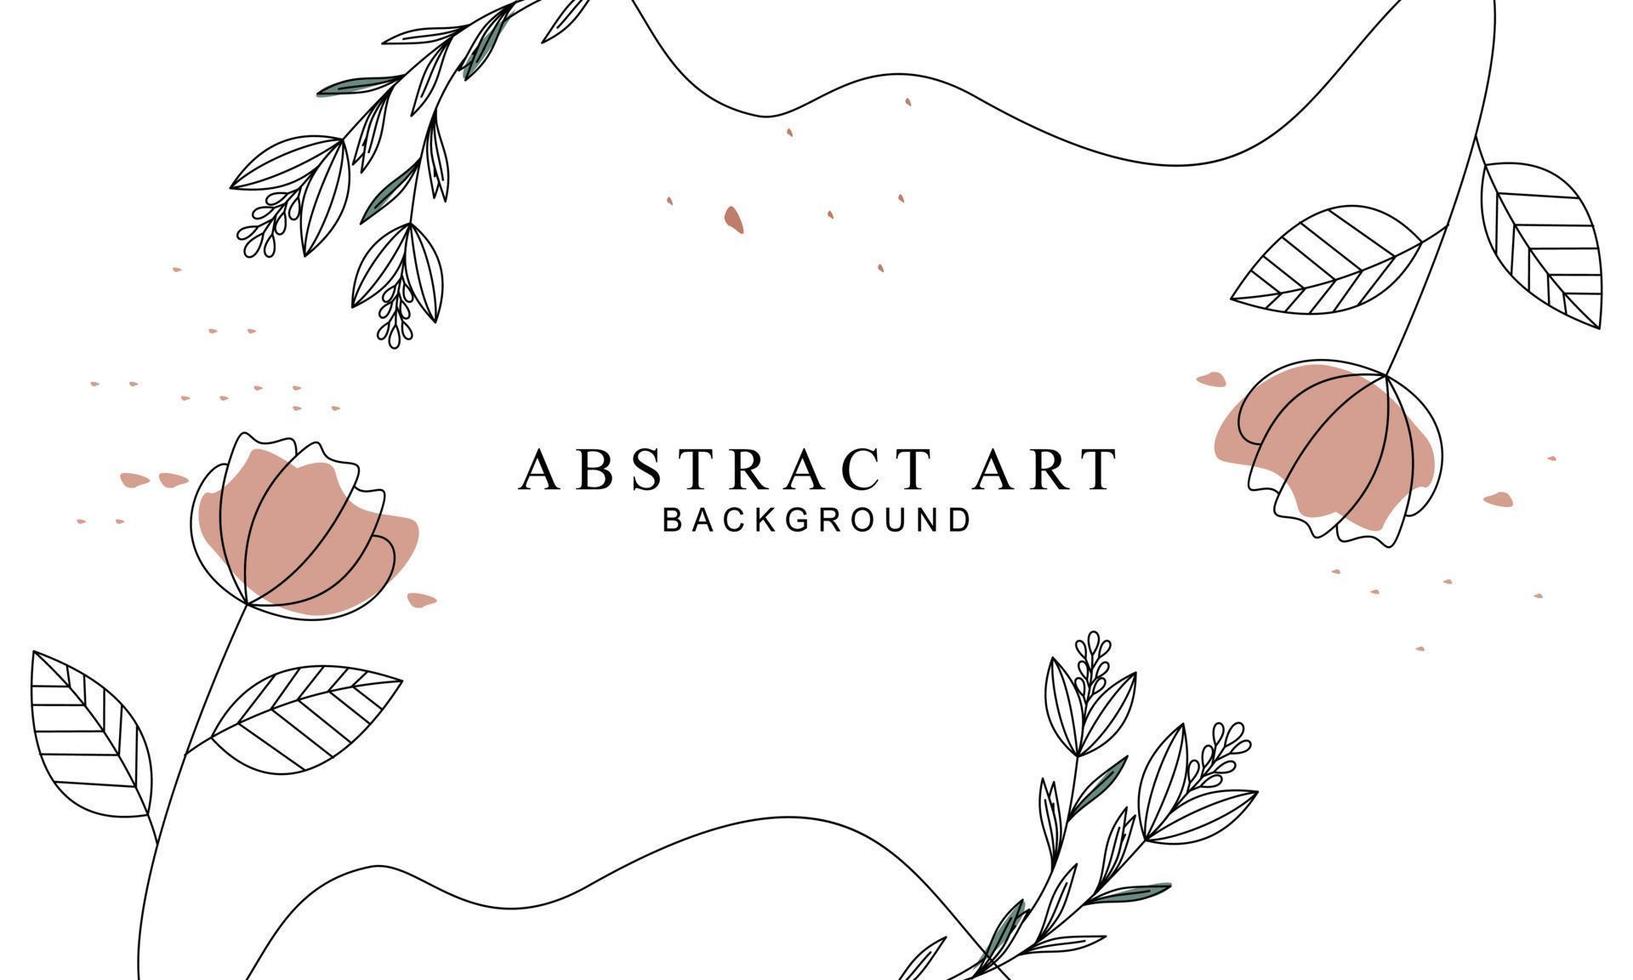 Abstract art background vector